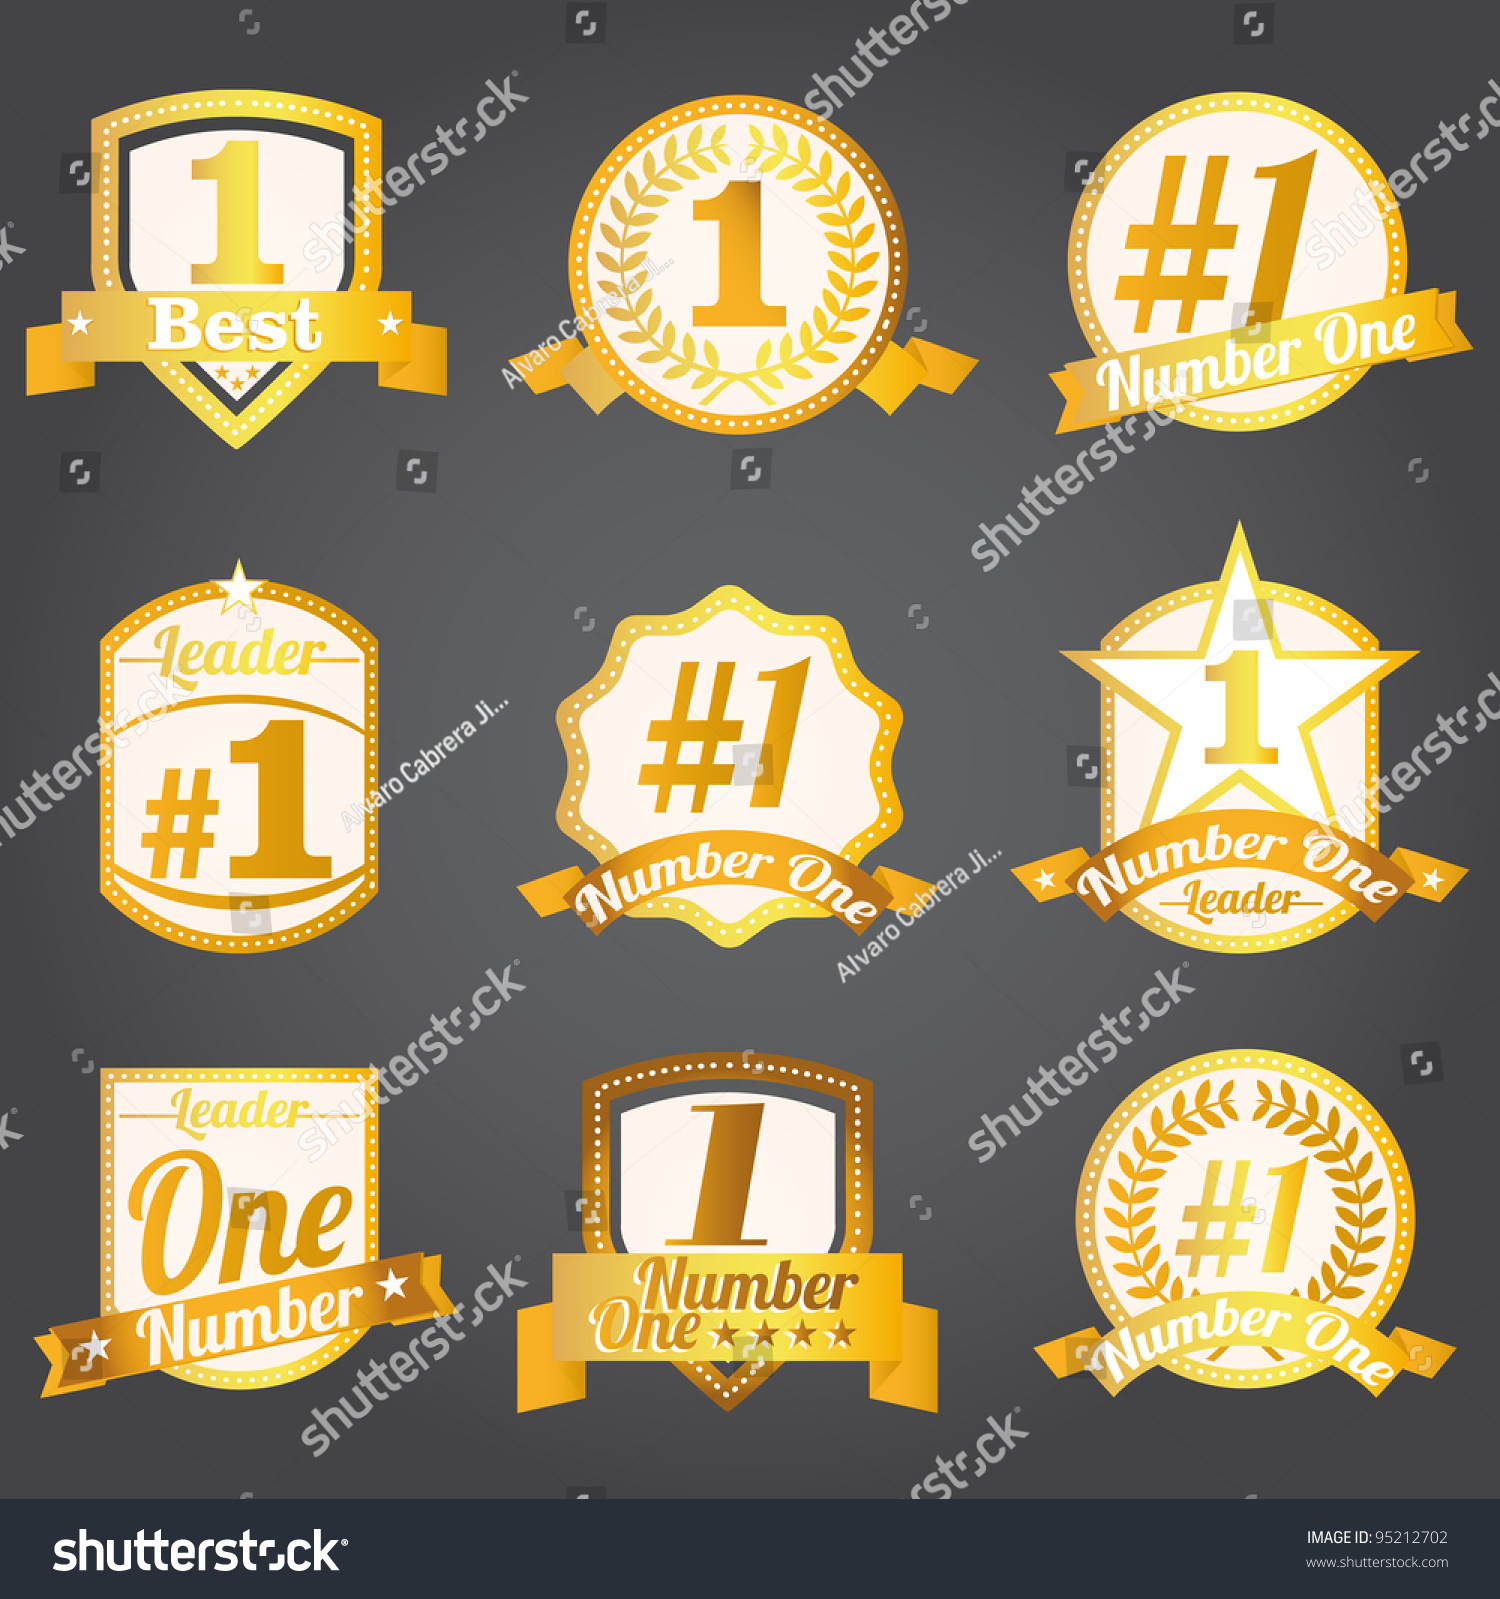 Vector Badges Certificates Seal Icons Number Stock Vector 95212702 ...